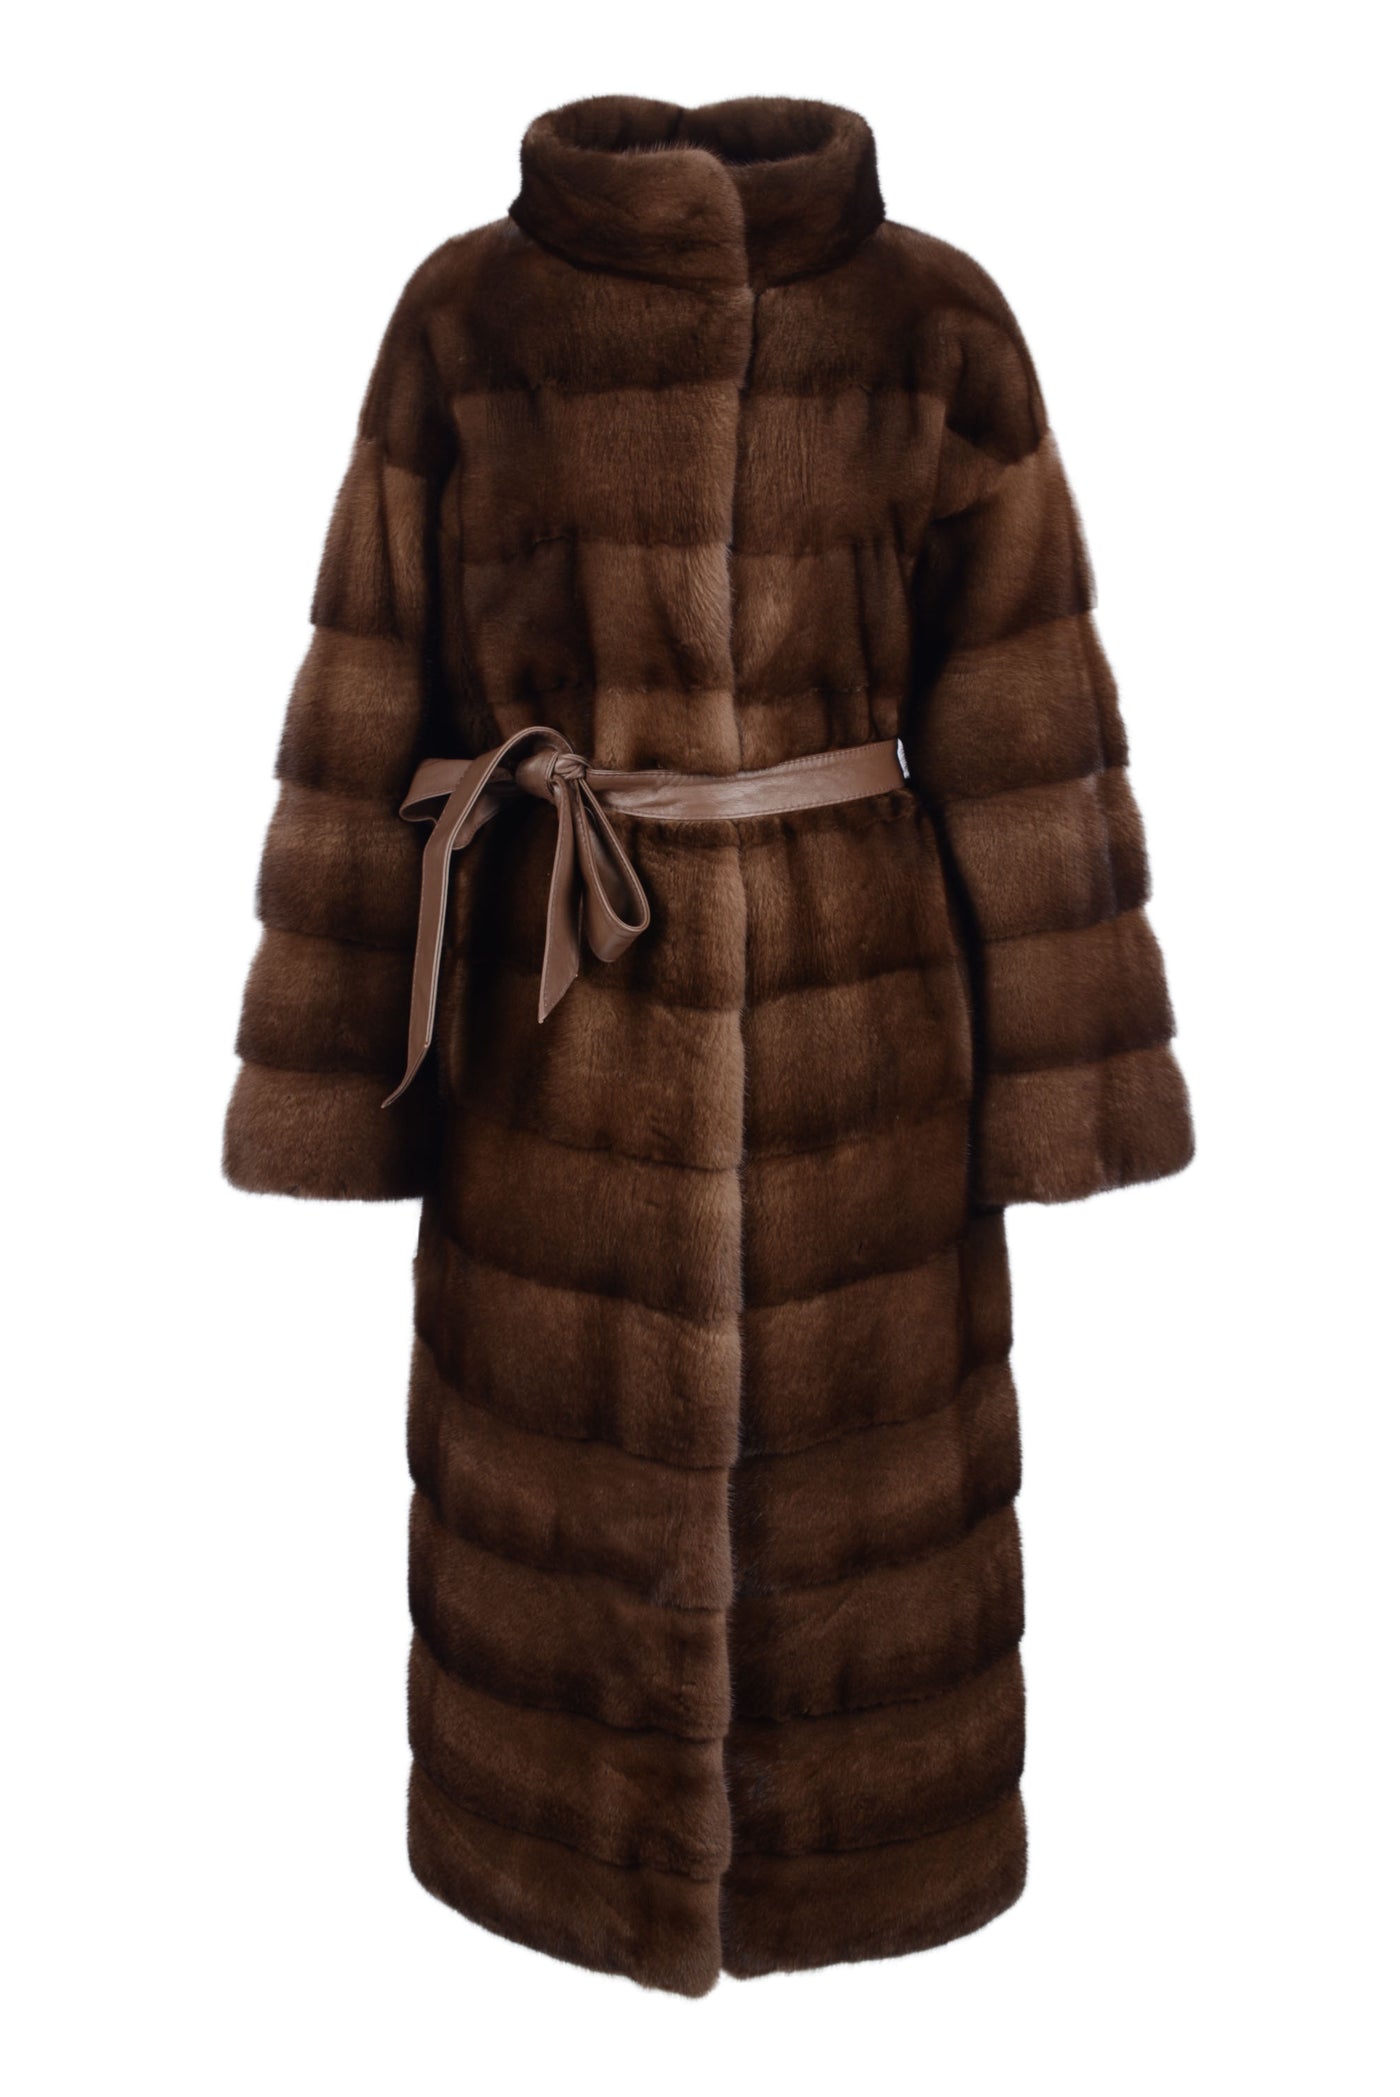 Long mink coat with stand up collar and leather belt